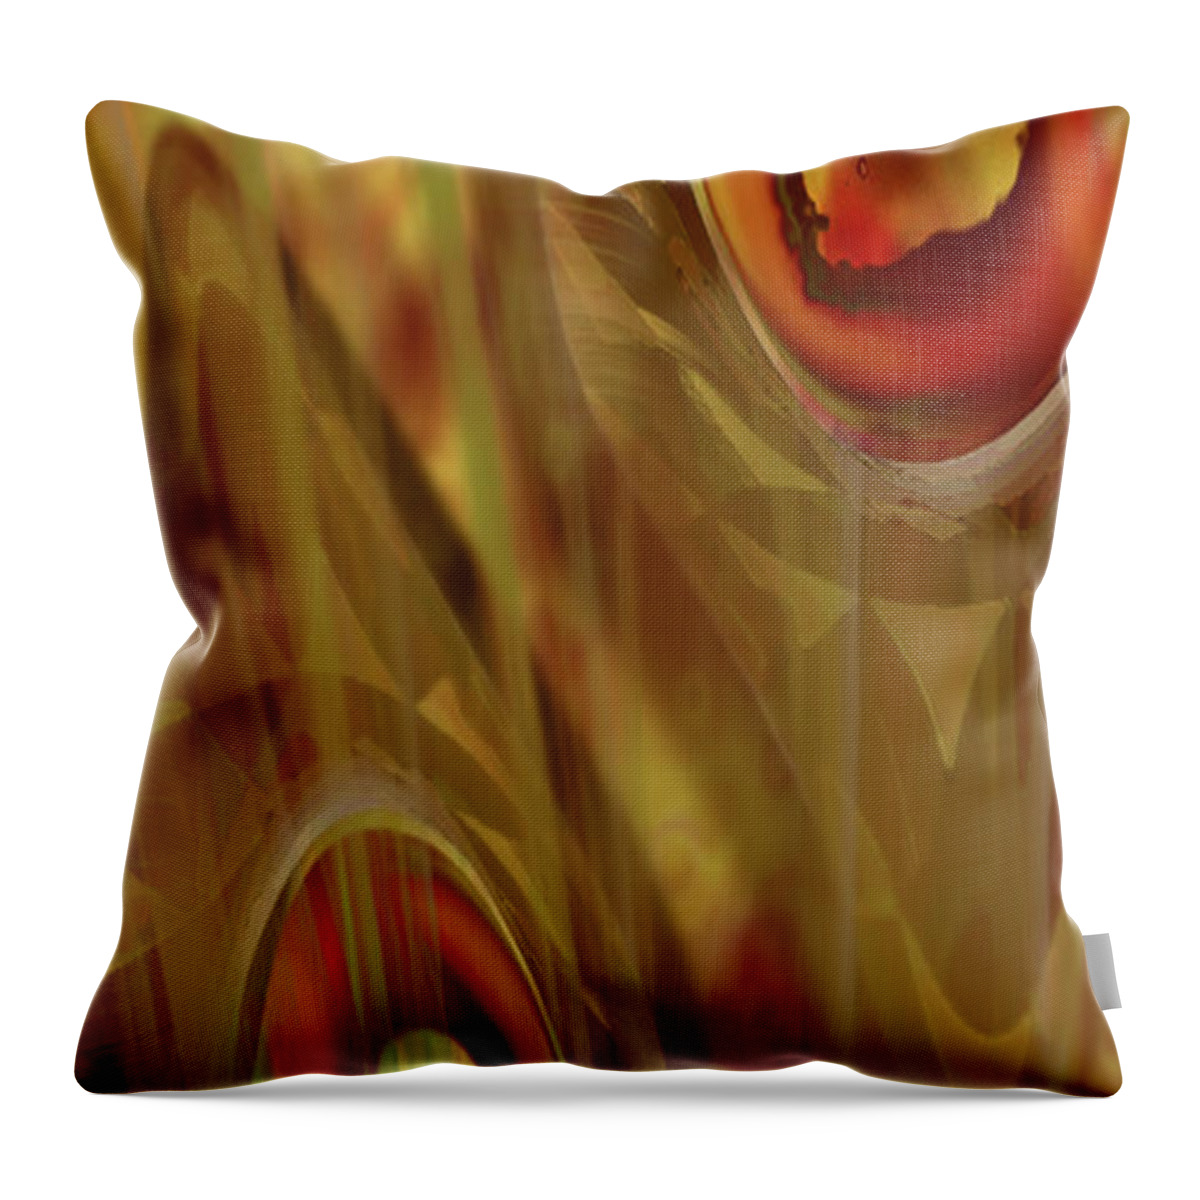 Digital Fantasy Art Created Virtually Throw Pillow featuring the digital art Almost Resting by Steve Sperry